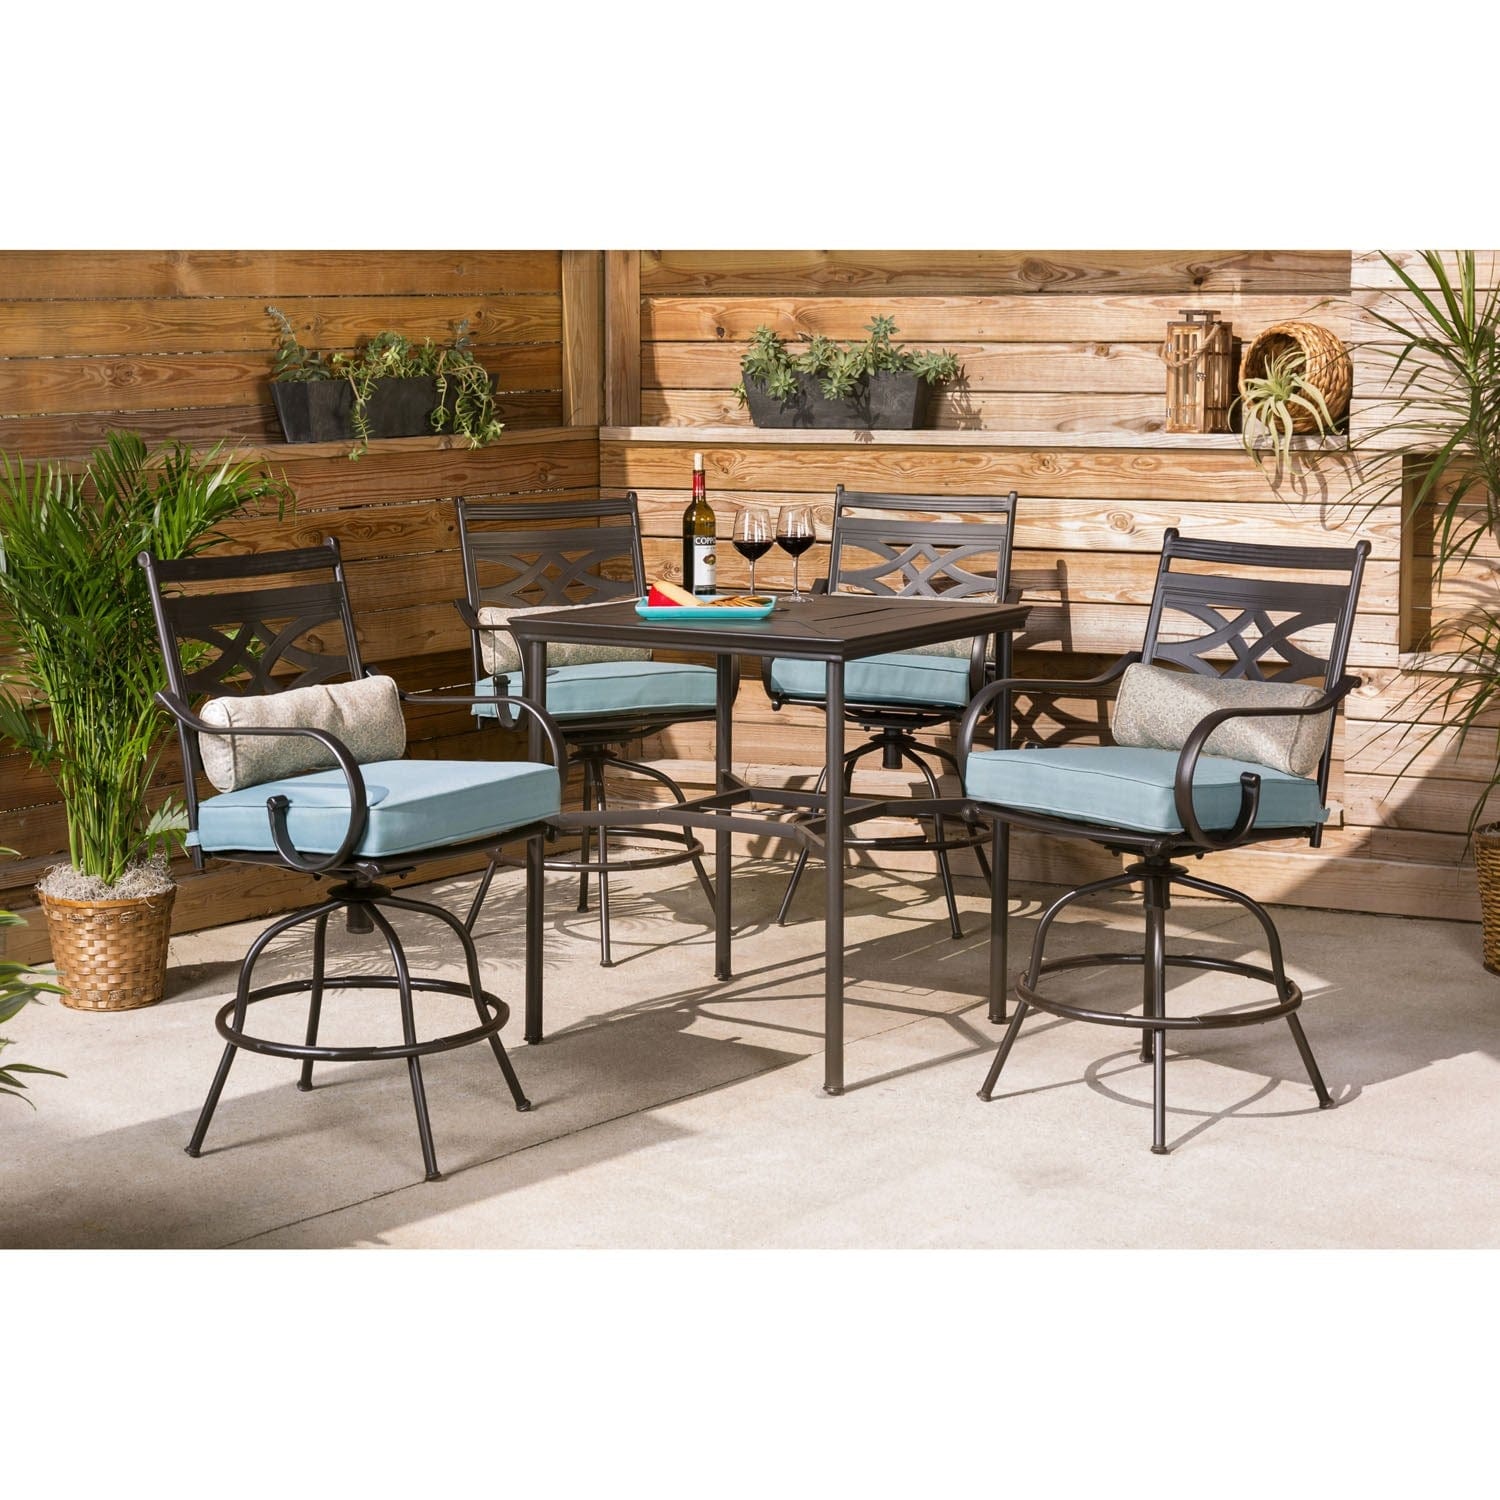 Hanover Outdoor Dining Set Hanover Montclair 5-Piece High-Dining Patio Set in Ocean Blue with 4 Swivel Chairs and a 33-In. Counter-Height Dining Table | MCLRDN5PCBR-BLU